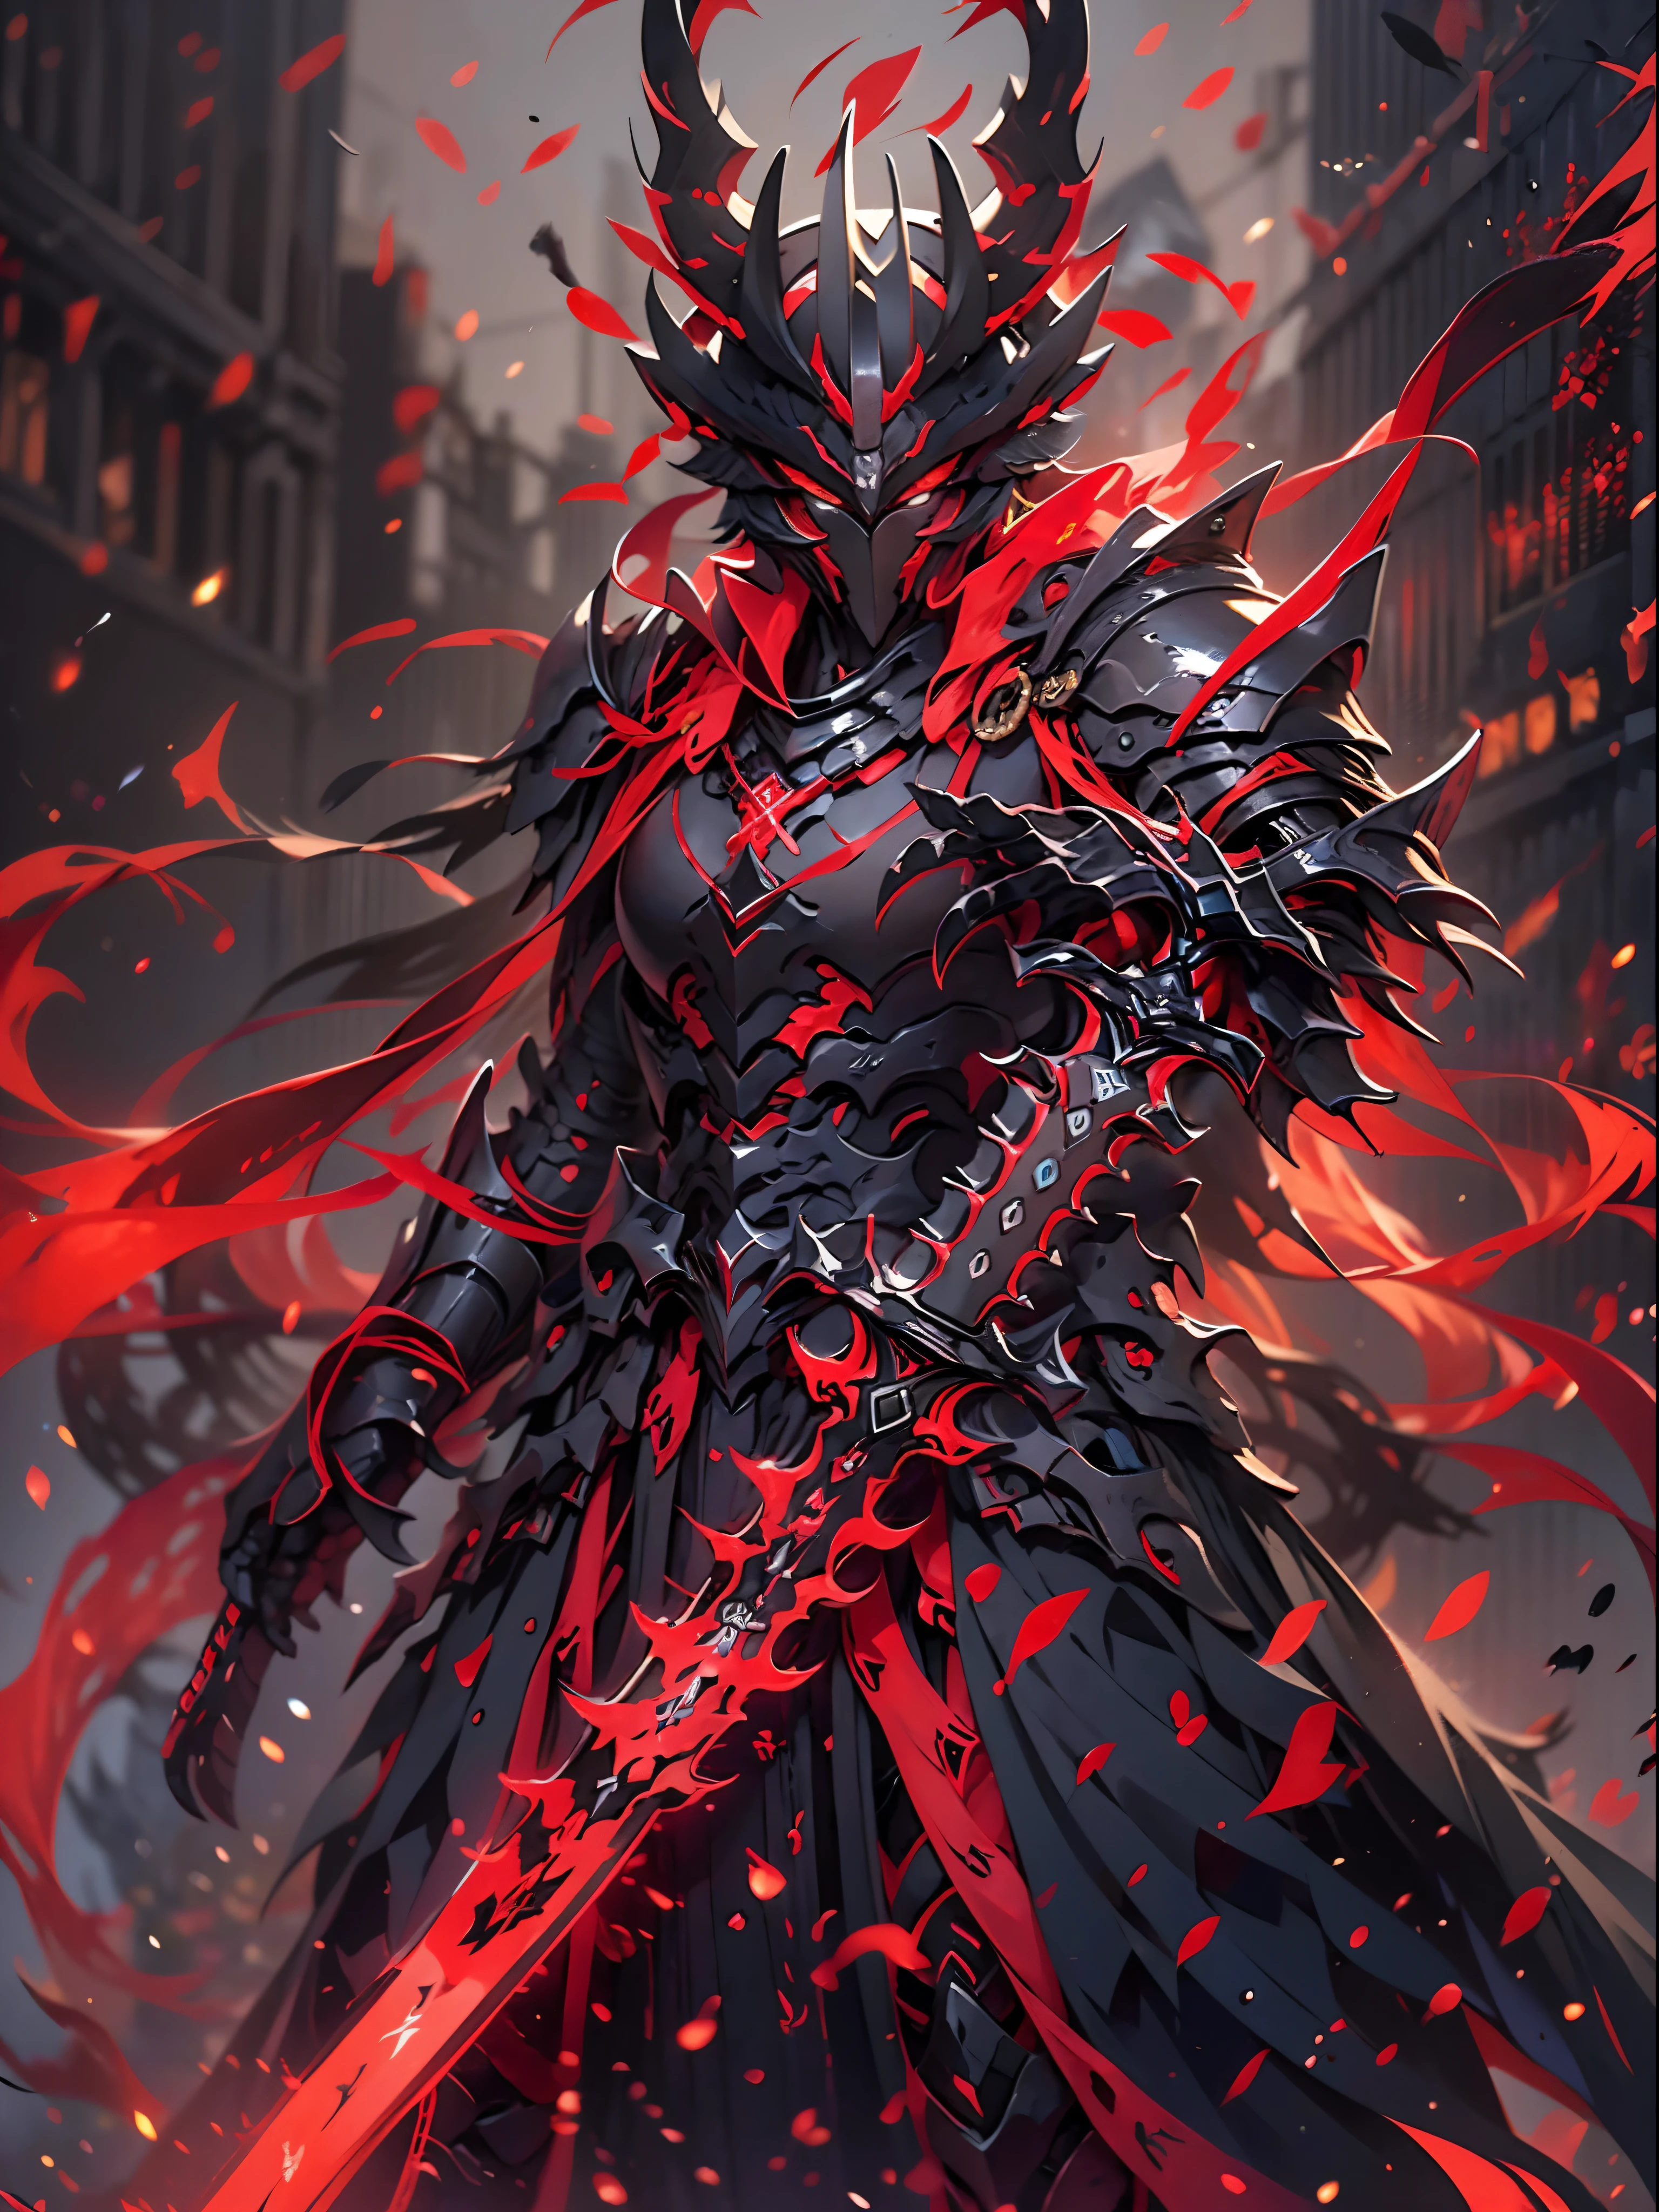 a close up of a person holding a sword and a red light, ruler of inferno, beautiful male god of death, black fire color reflected armor, demon samurai warrior, demon samurai, keqing from genshin impact, king of time reaper, ares with heavy armor and sword, lord of cinder, red demon armor, black and red armor, blood red armor